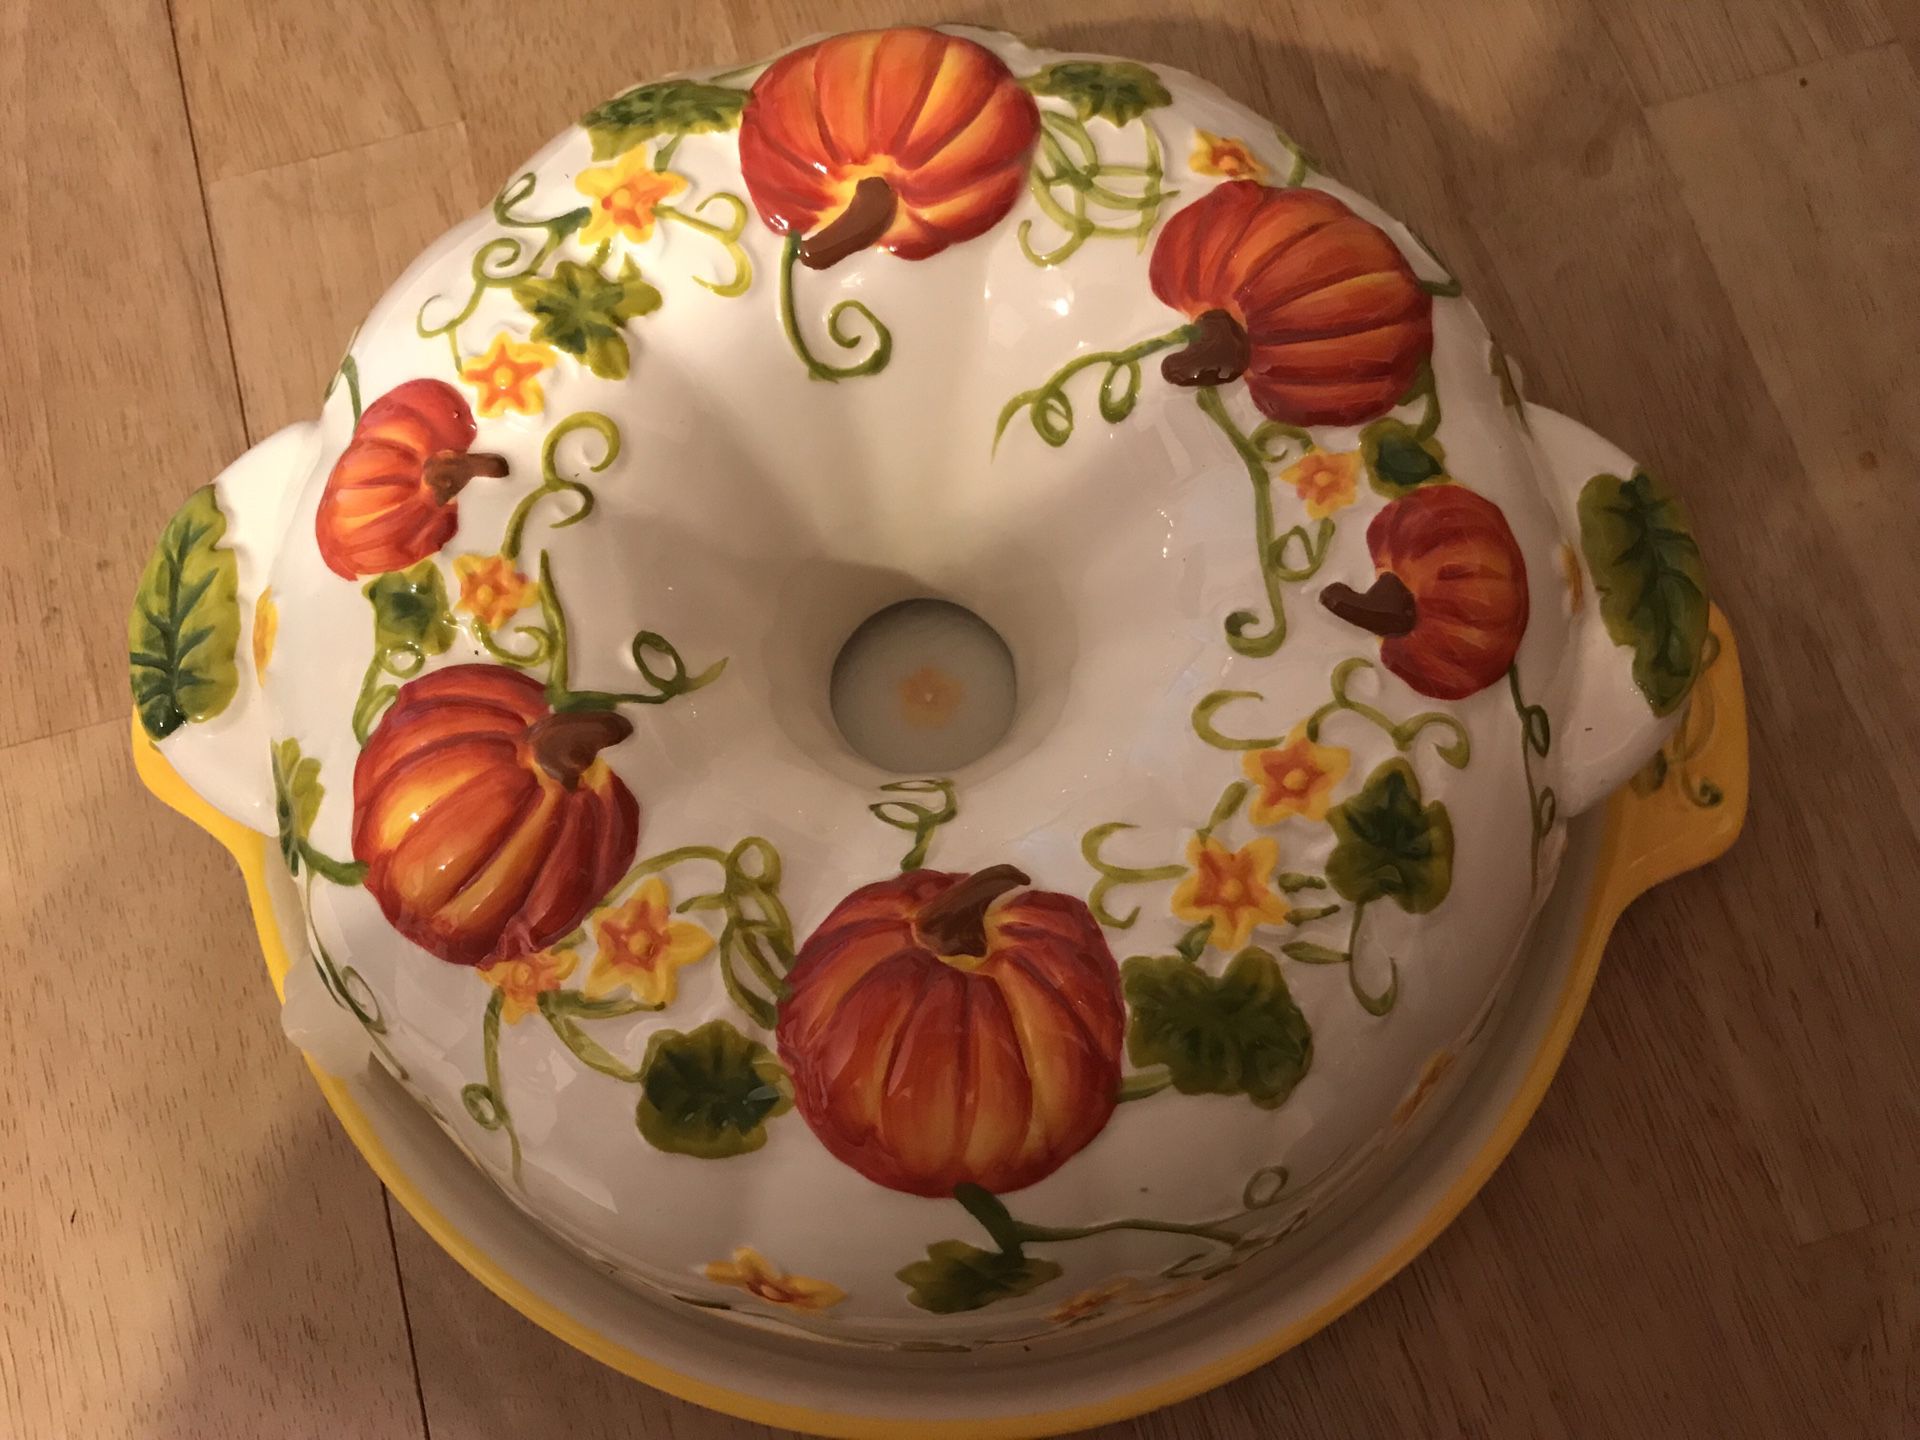 New Ceramic Bundt Pan with Serving Tray